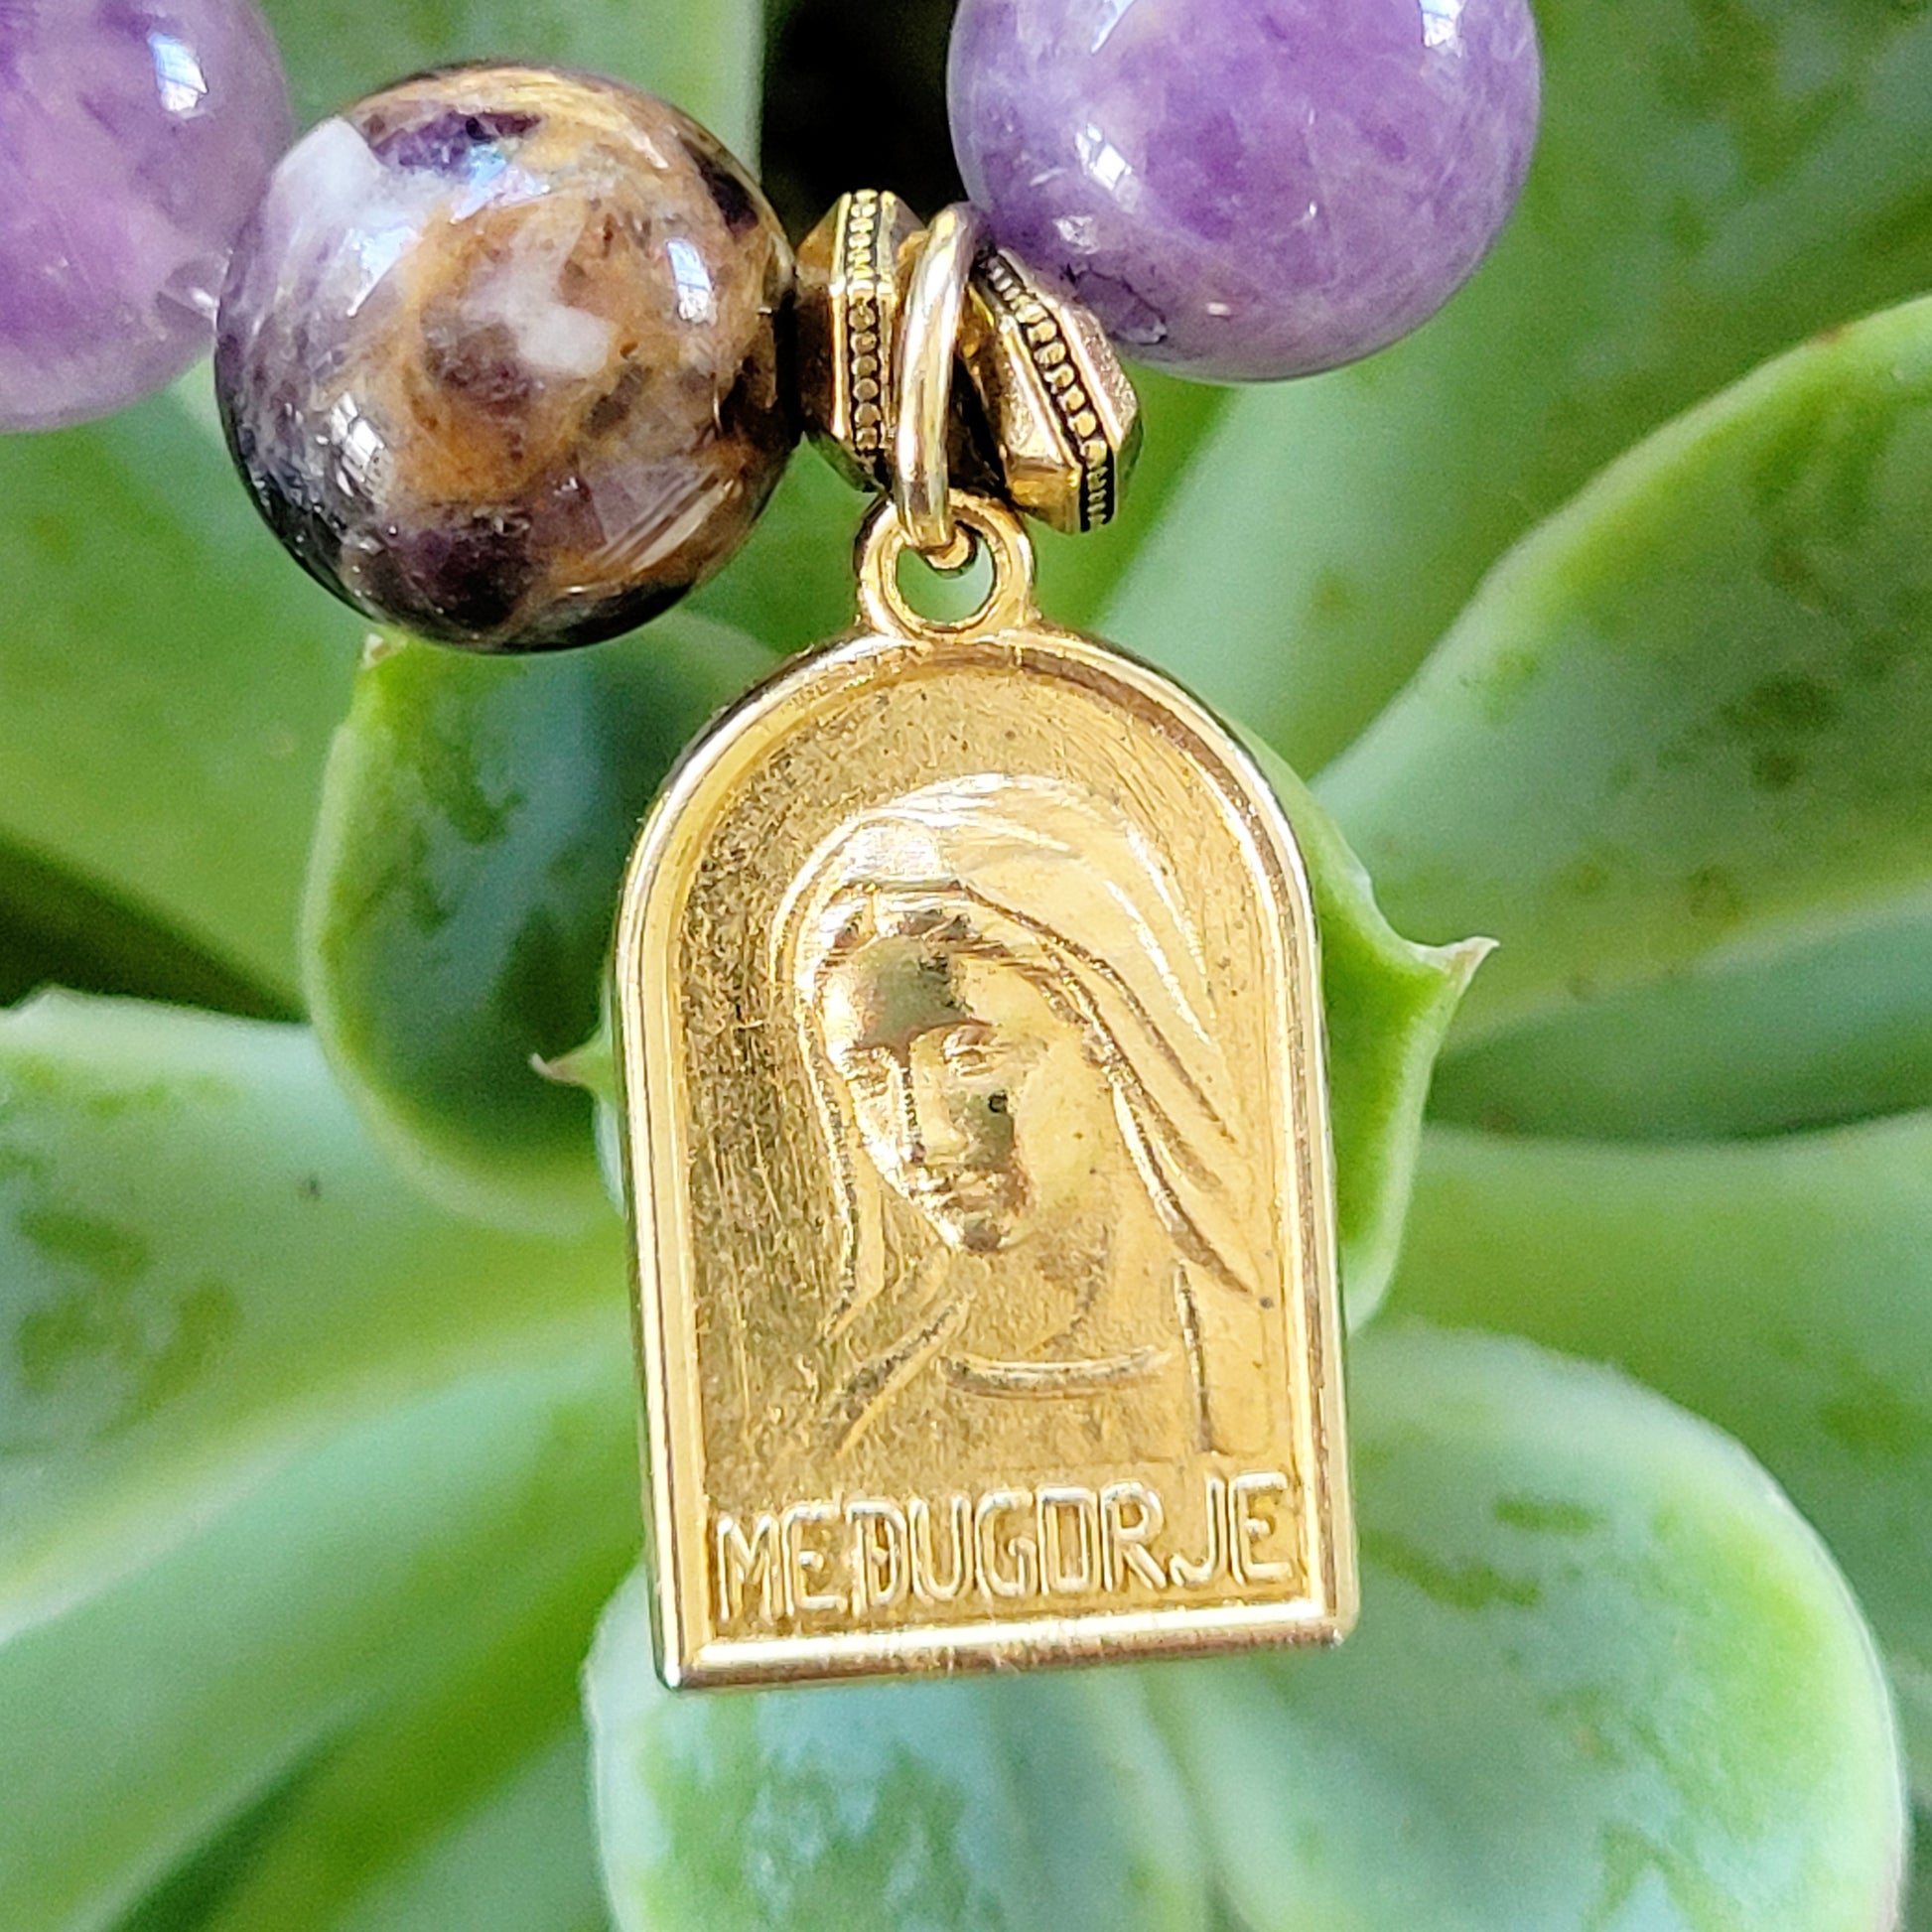 Amethyst 10mm Dogtooth Beaded Bracelet w/ Our Lady of Medjugorje Gold Plated Medal - Afterlife Jewelry Designs